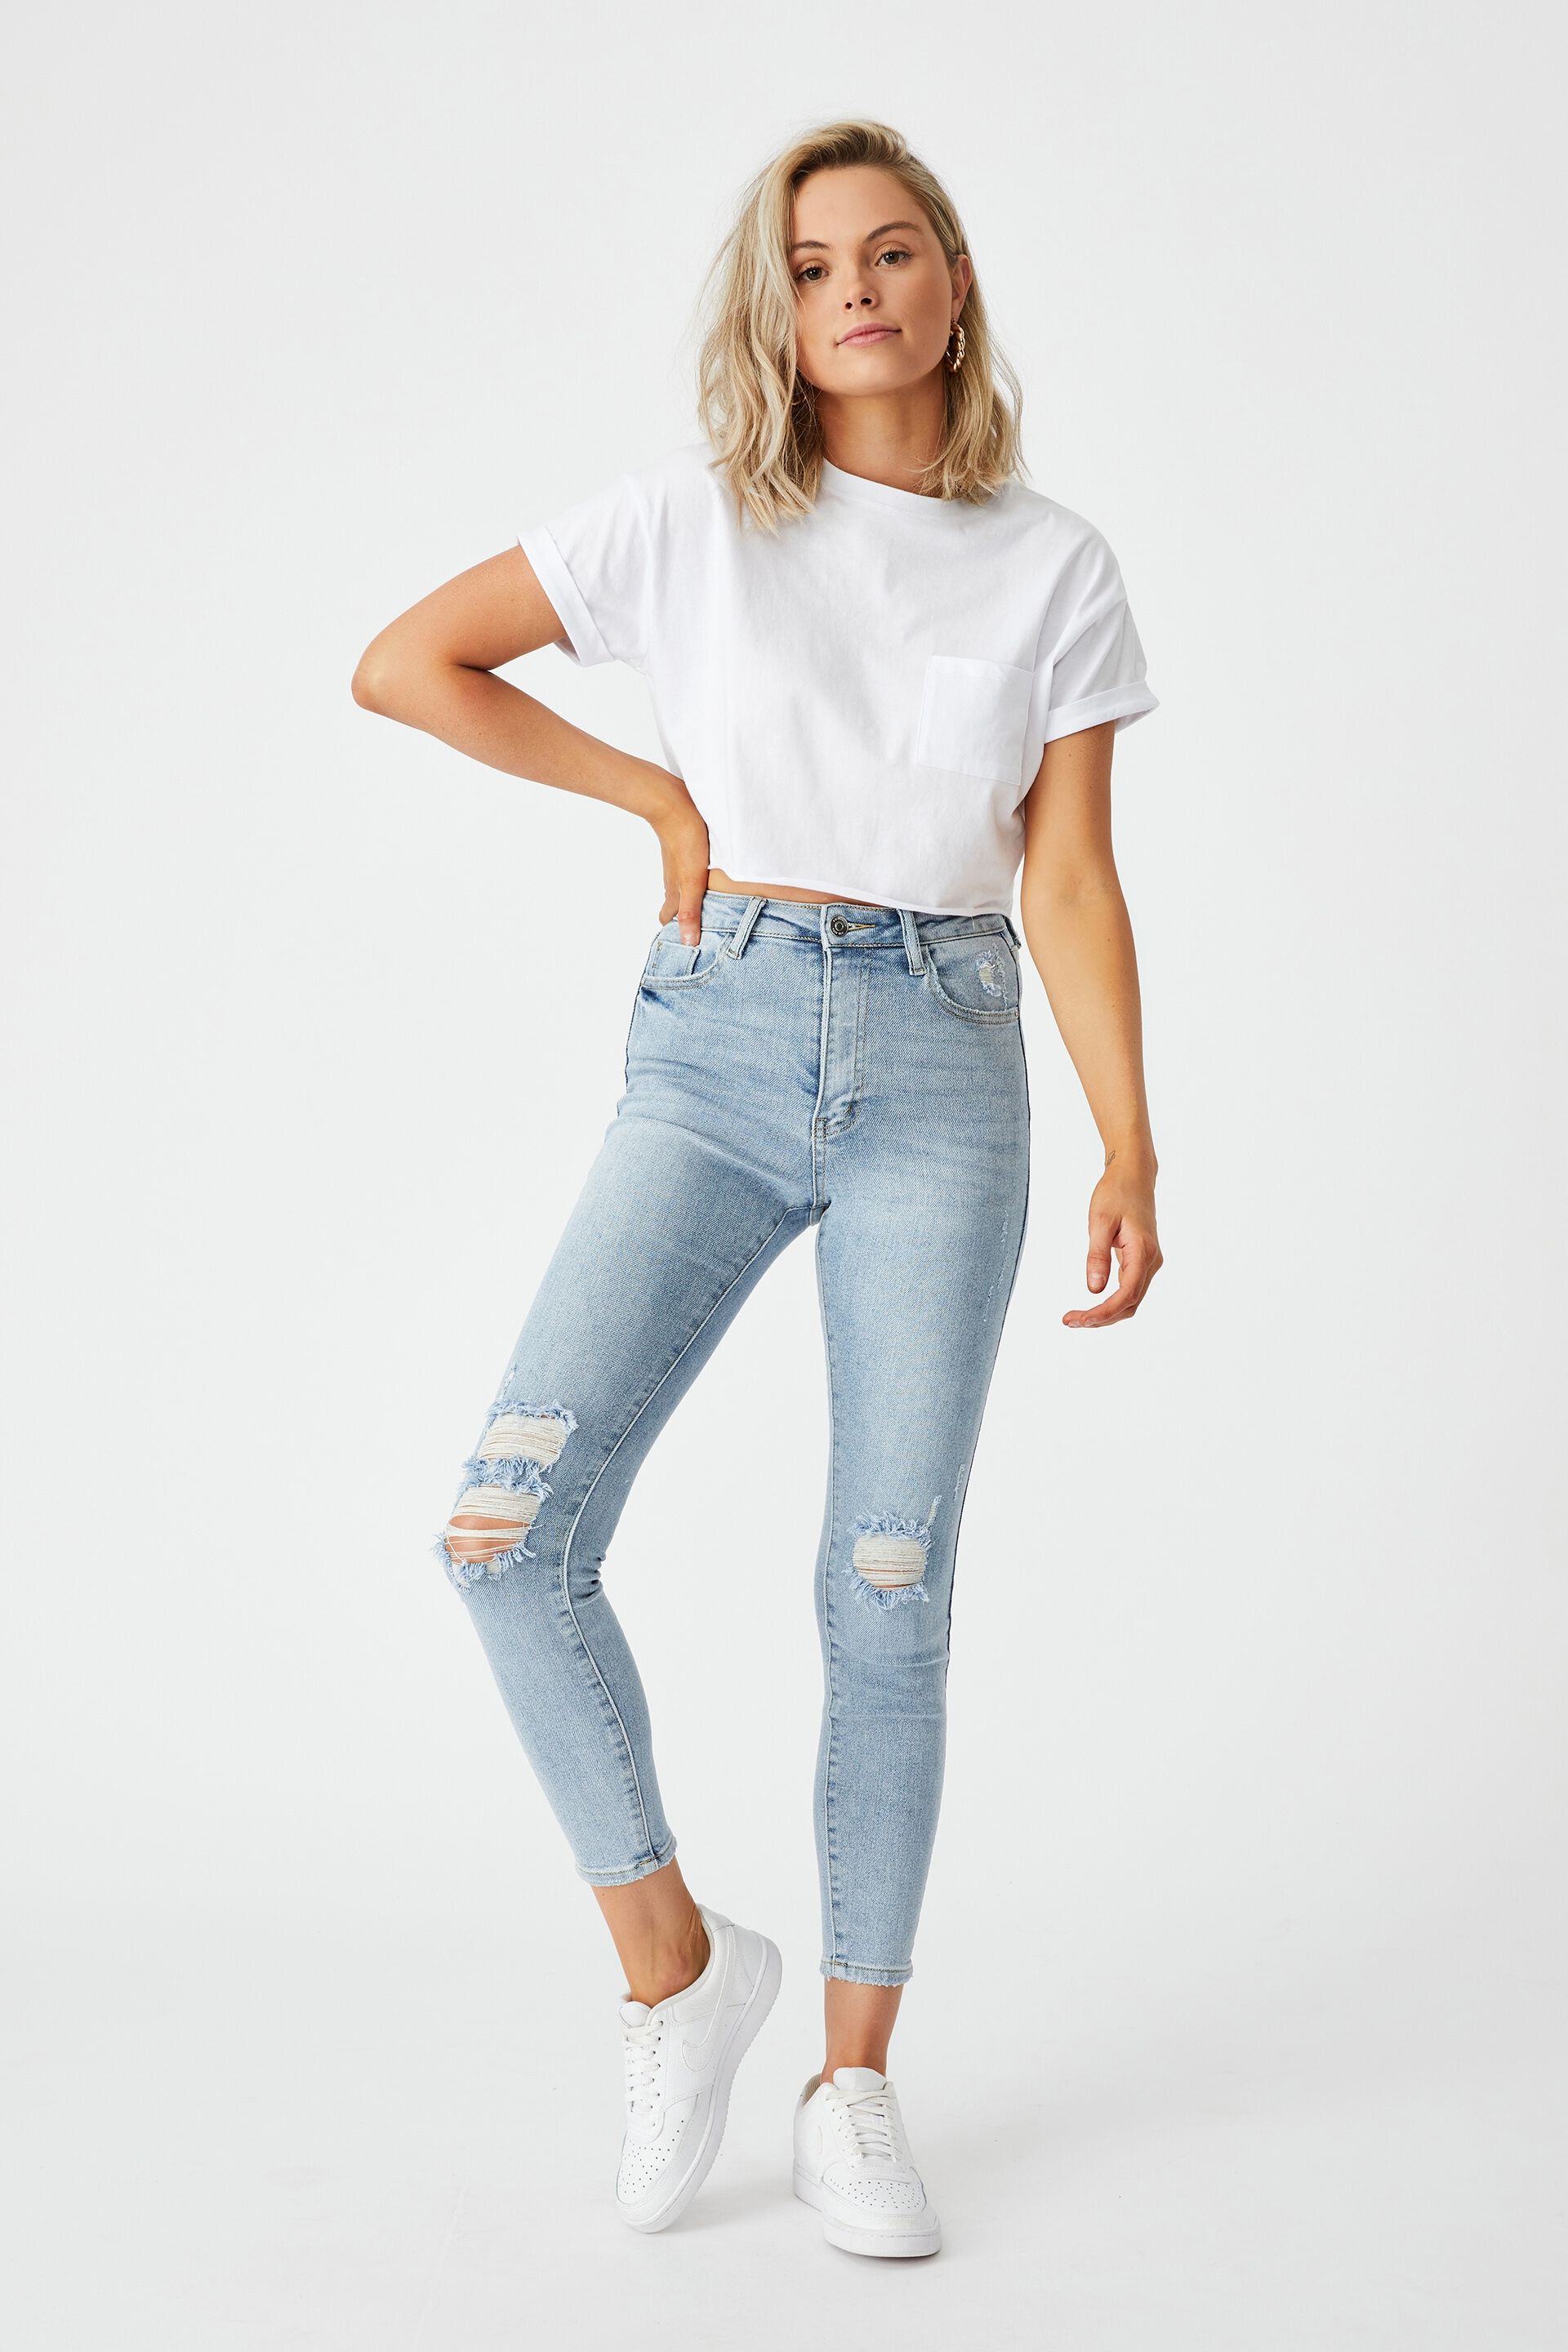 high waisted ripped jeans australia